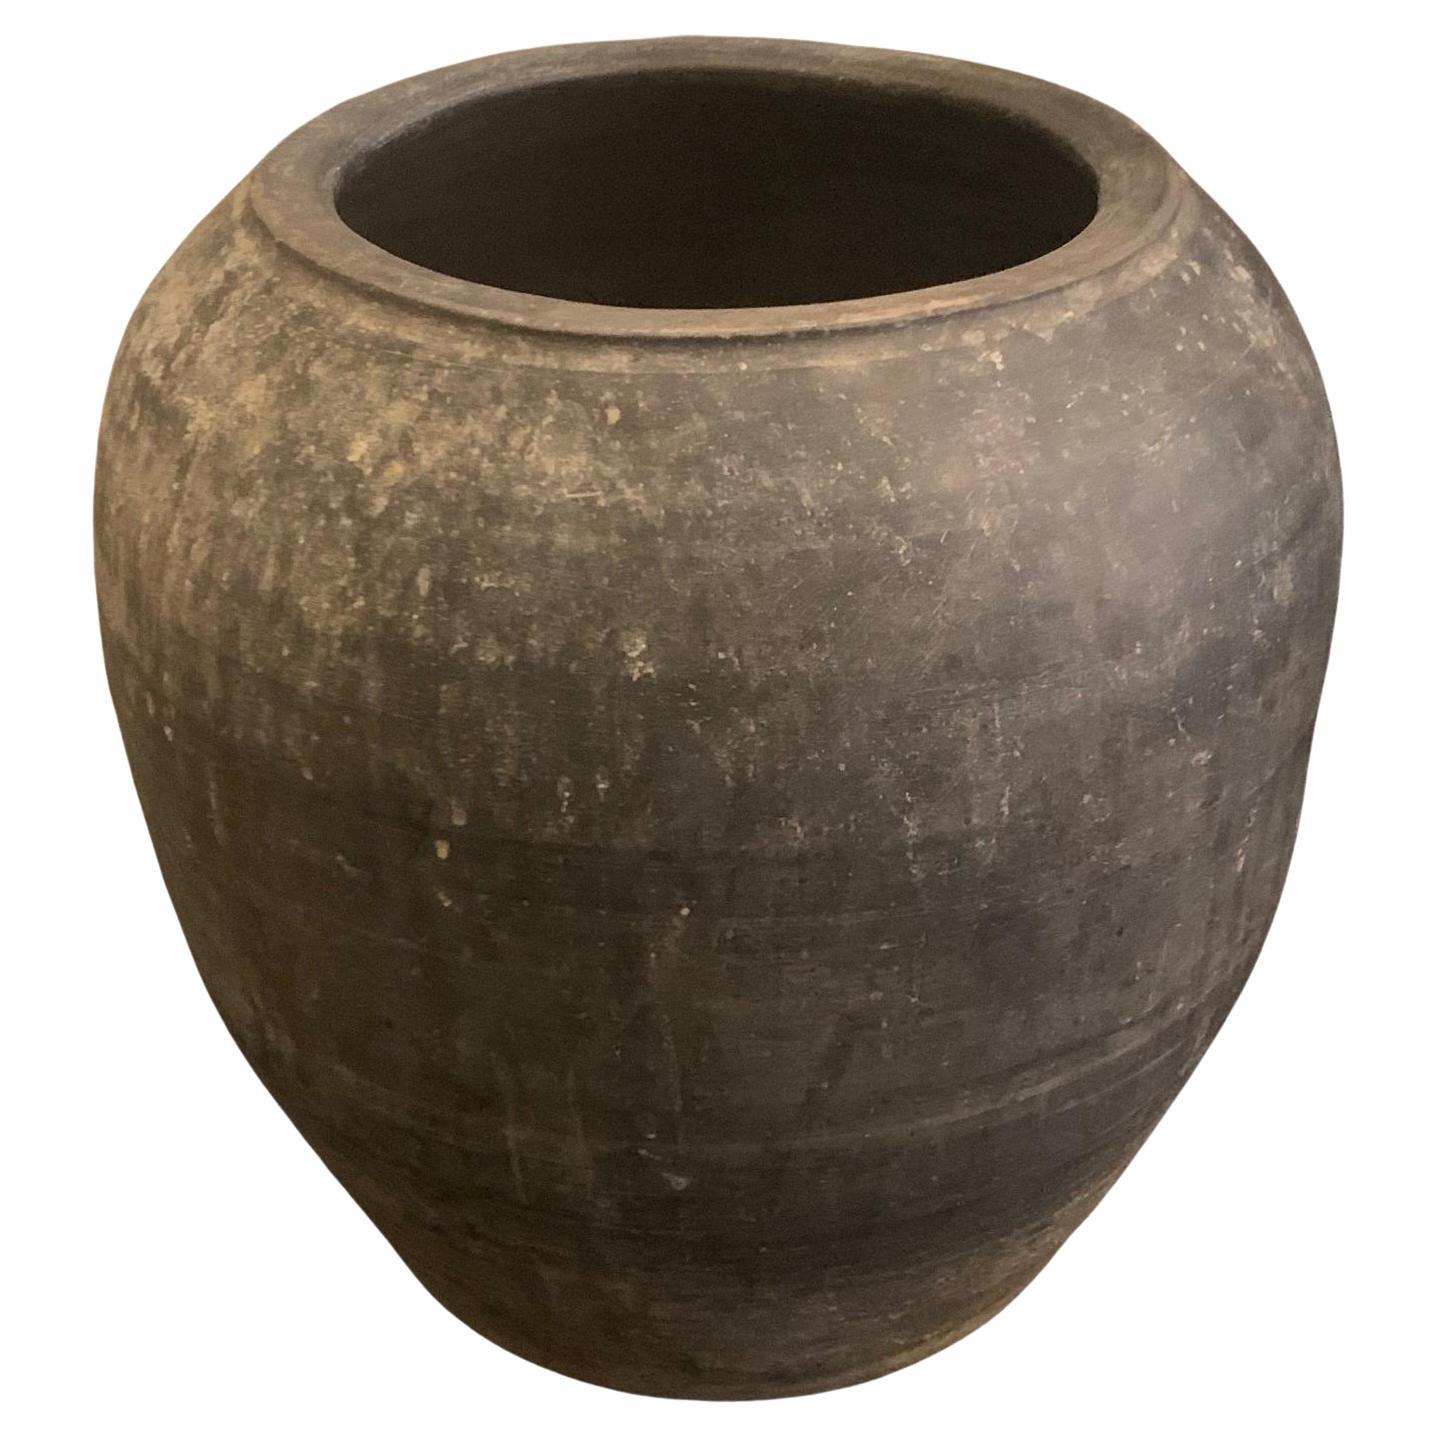 Charcoal Grey Weathered Terracotta Large Pot, China, 20th Century